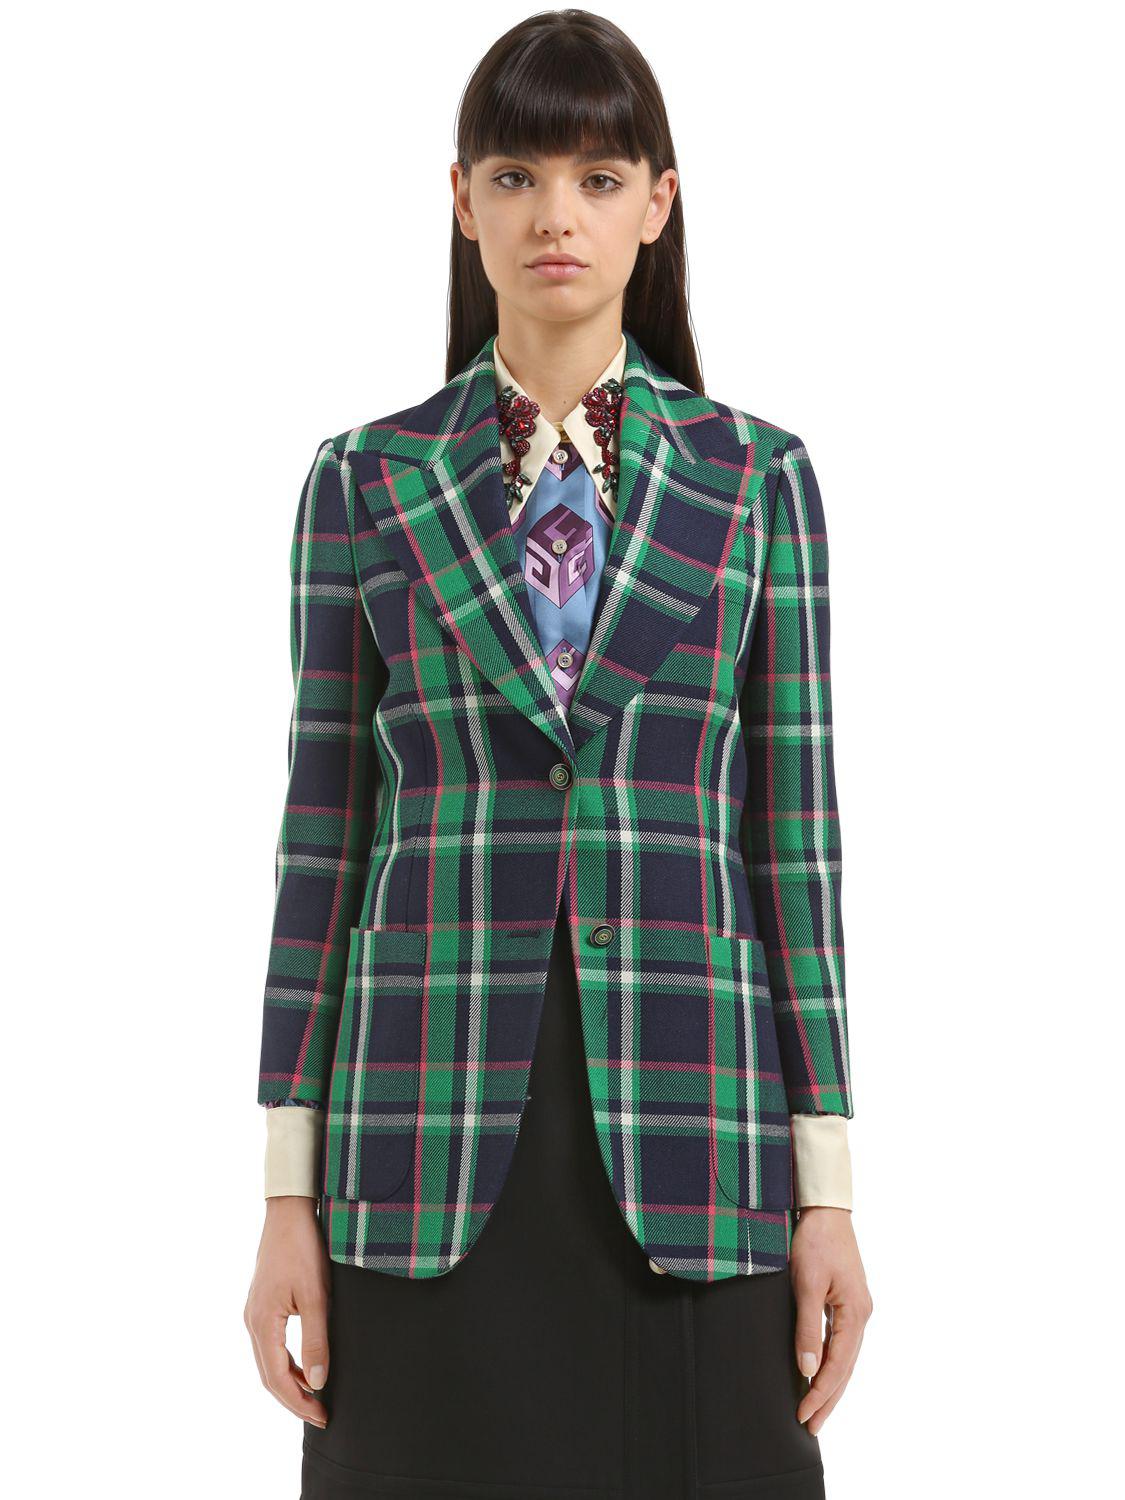 Gucci Tiger Patch Plaid Wool Jacket in 